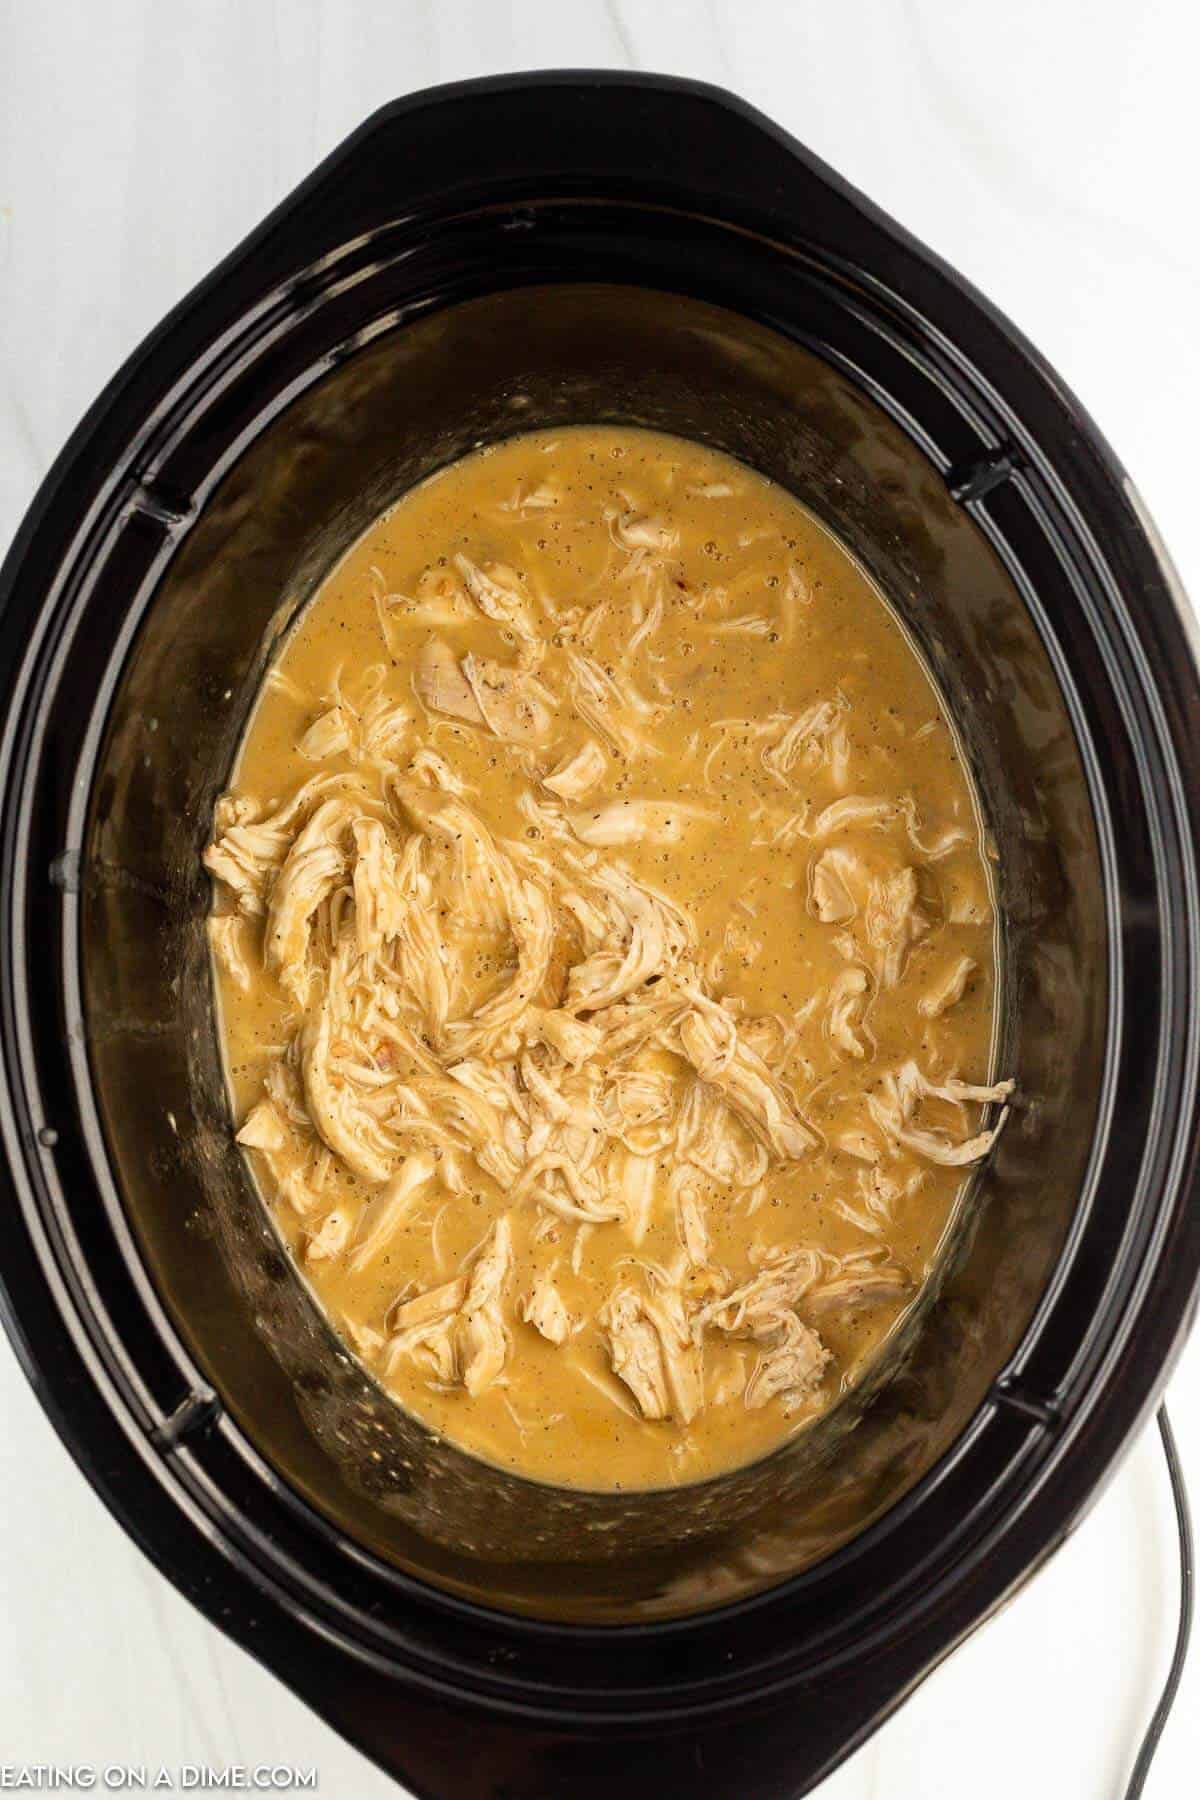 Stirring the shredded chicken in the slow cooker